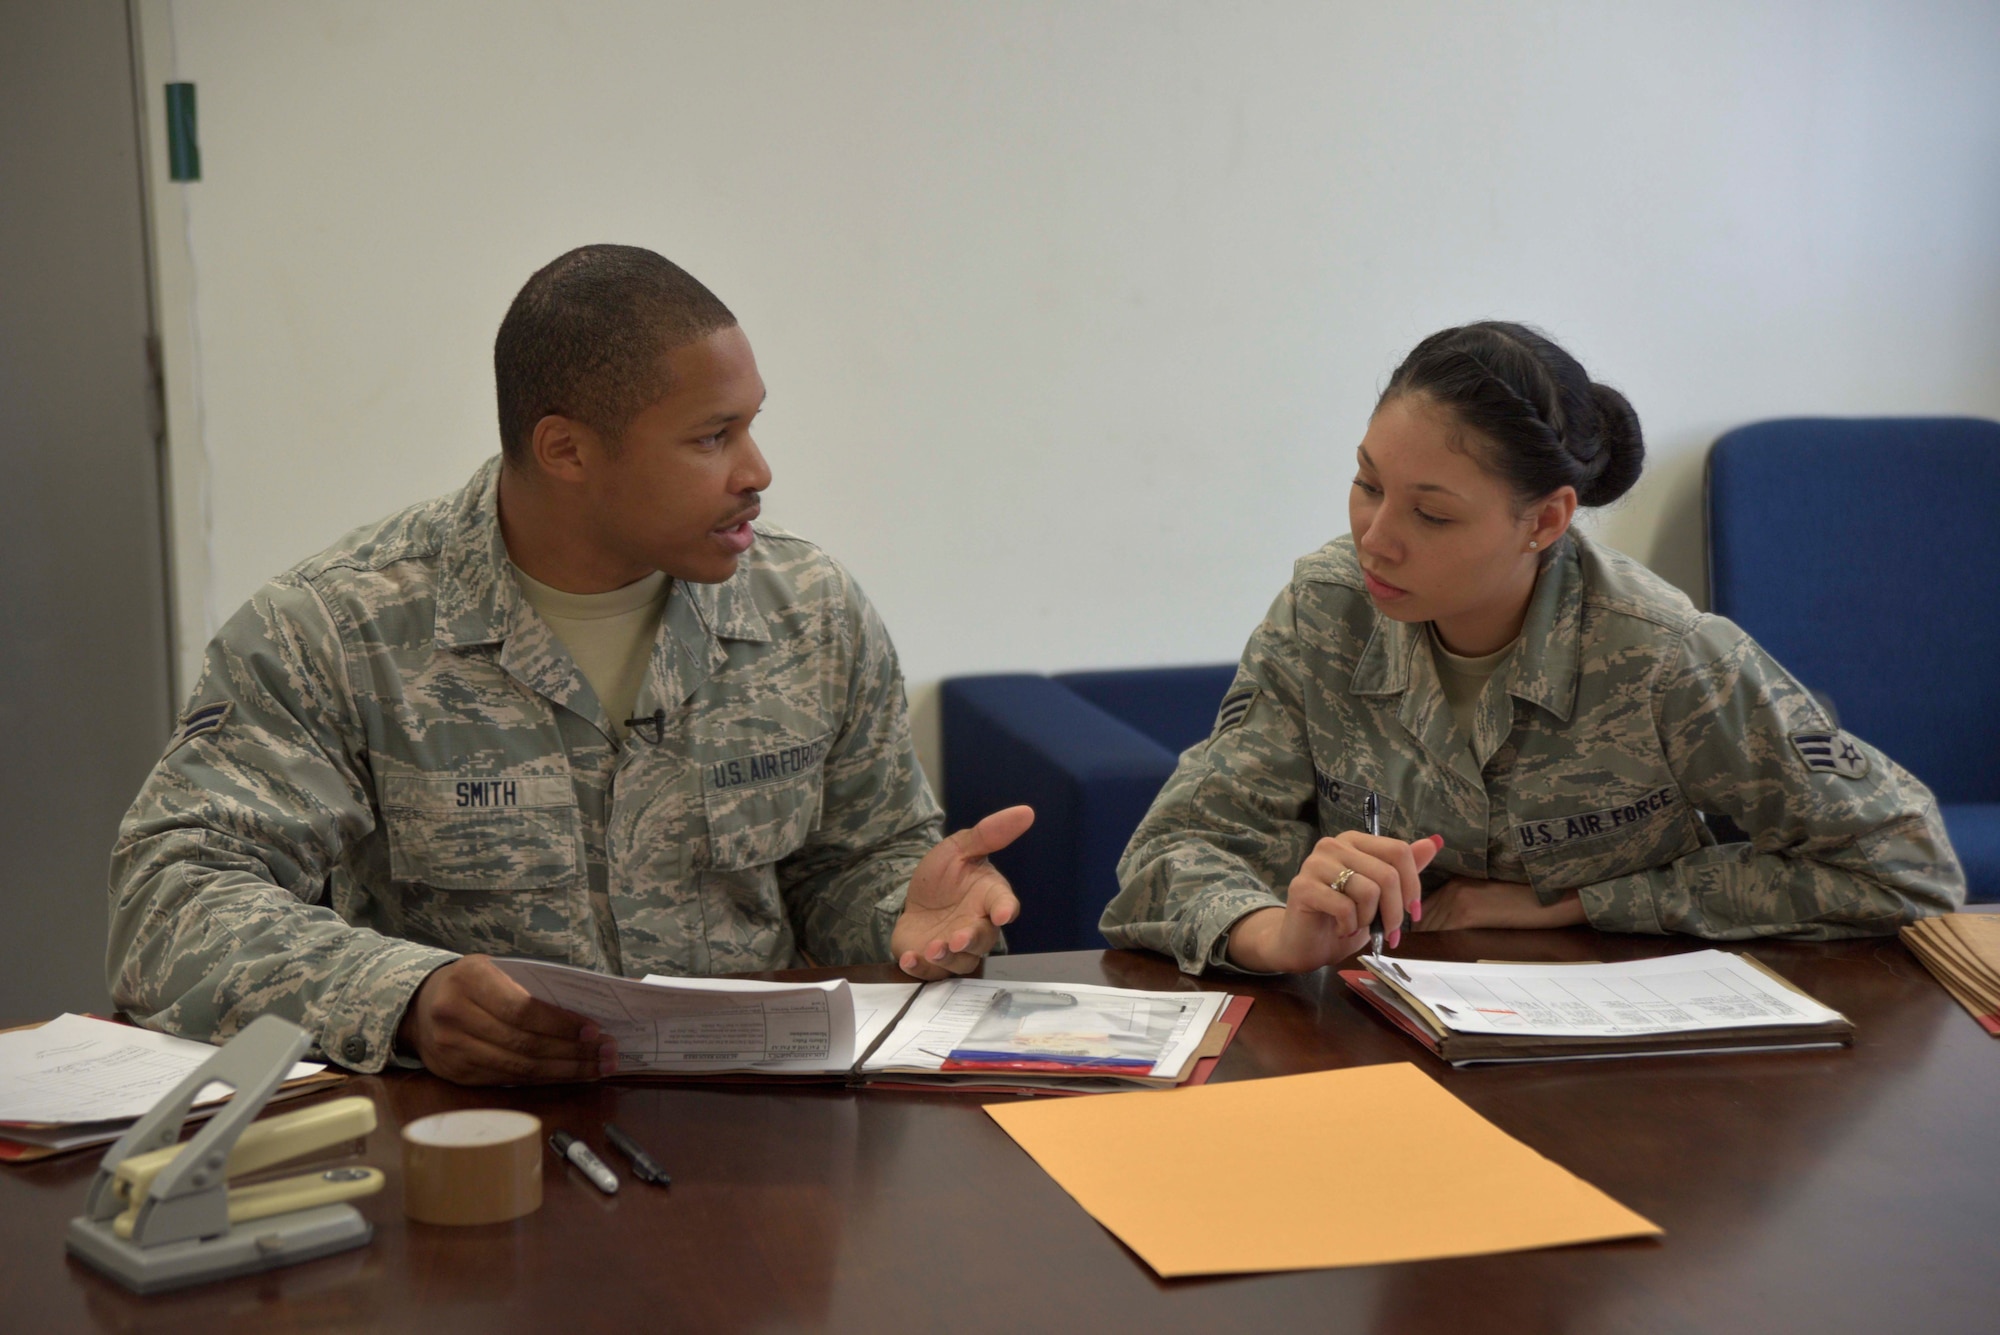 U.S. Air Force Airman 1st Class Spencer Smith, 35th Force Support Squadron installation personnel readiness journeyman, reviews deployment readiness records with Senior Airman Leandra King, 13th Fighter Squadron command support staff and unit deployment manager. Part of Smith’s duties is to work alongside unit deployment managers to ensure accountability of personnel deployed abroad. (U.S. Air Force photo by Senior Airman Jose L. Hernandez-Domitilo)